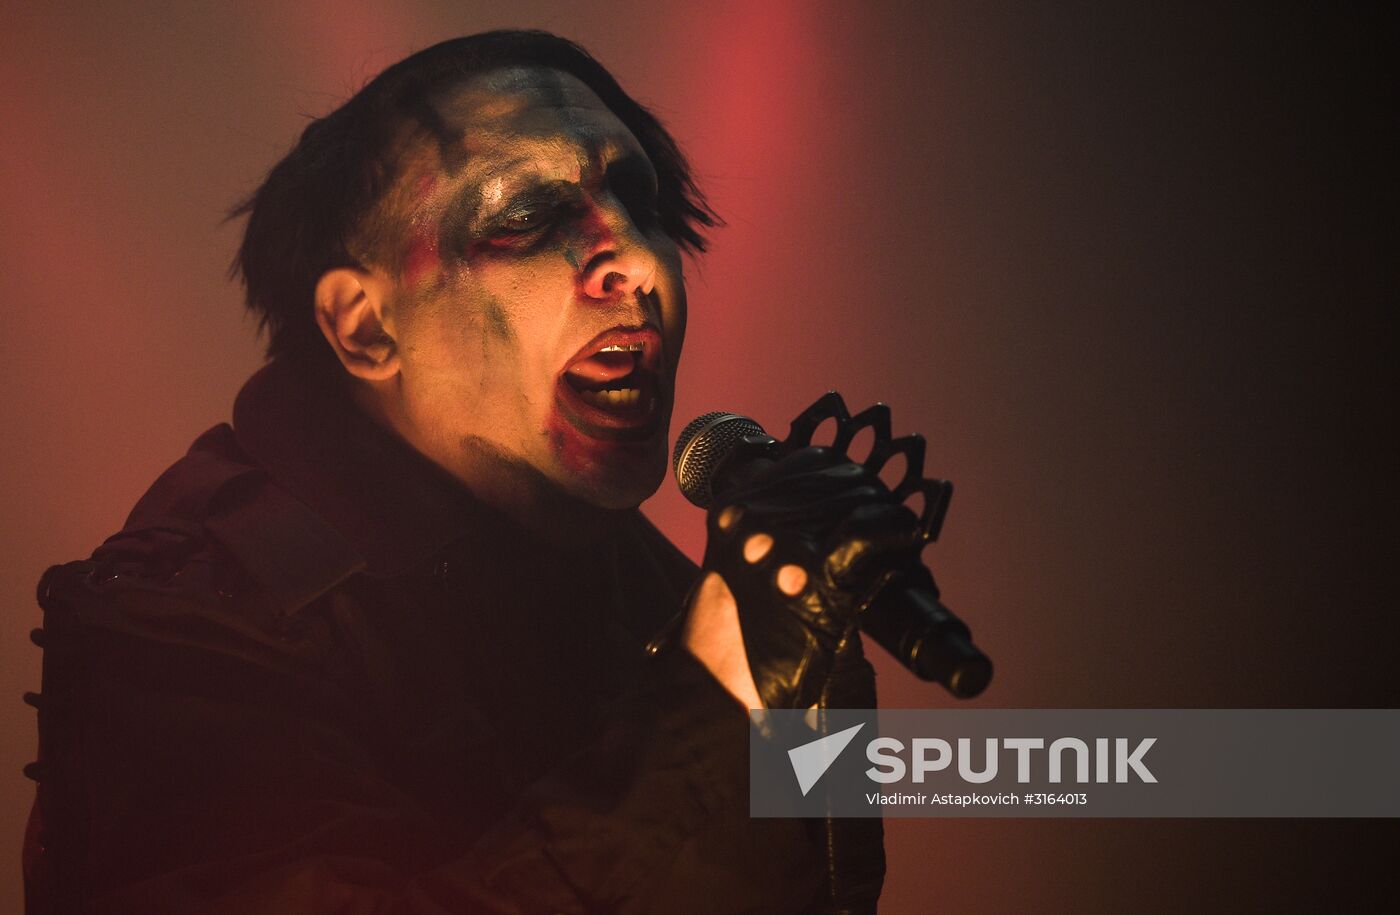 Marilyn Manson's concert in Moscow